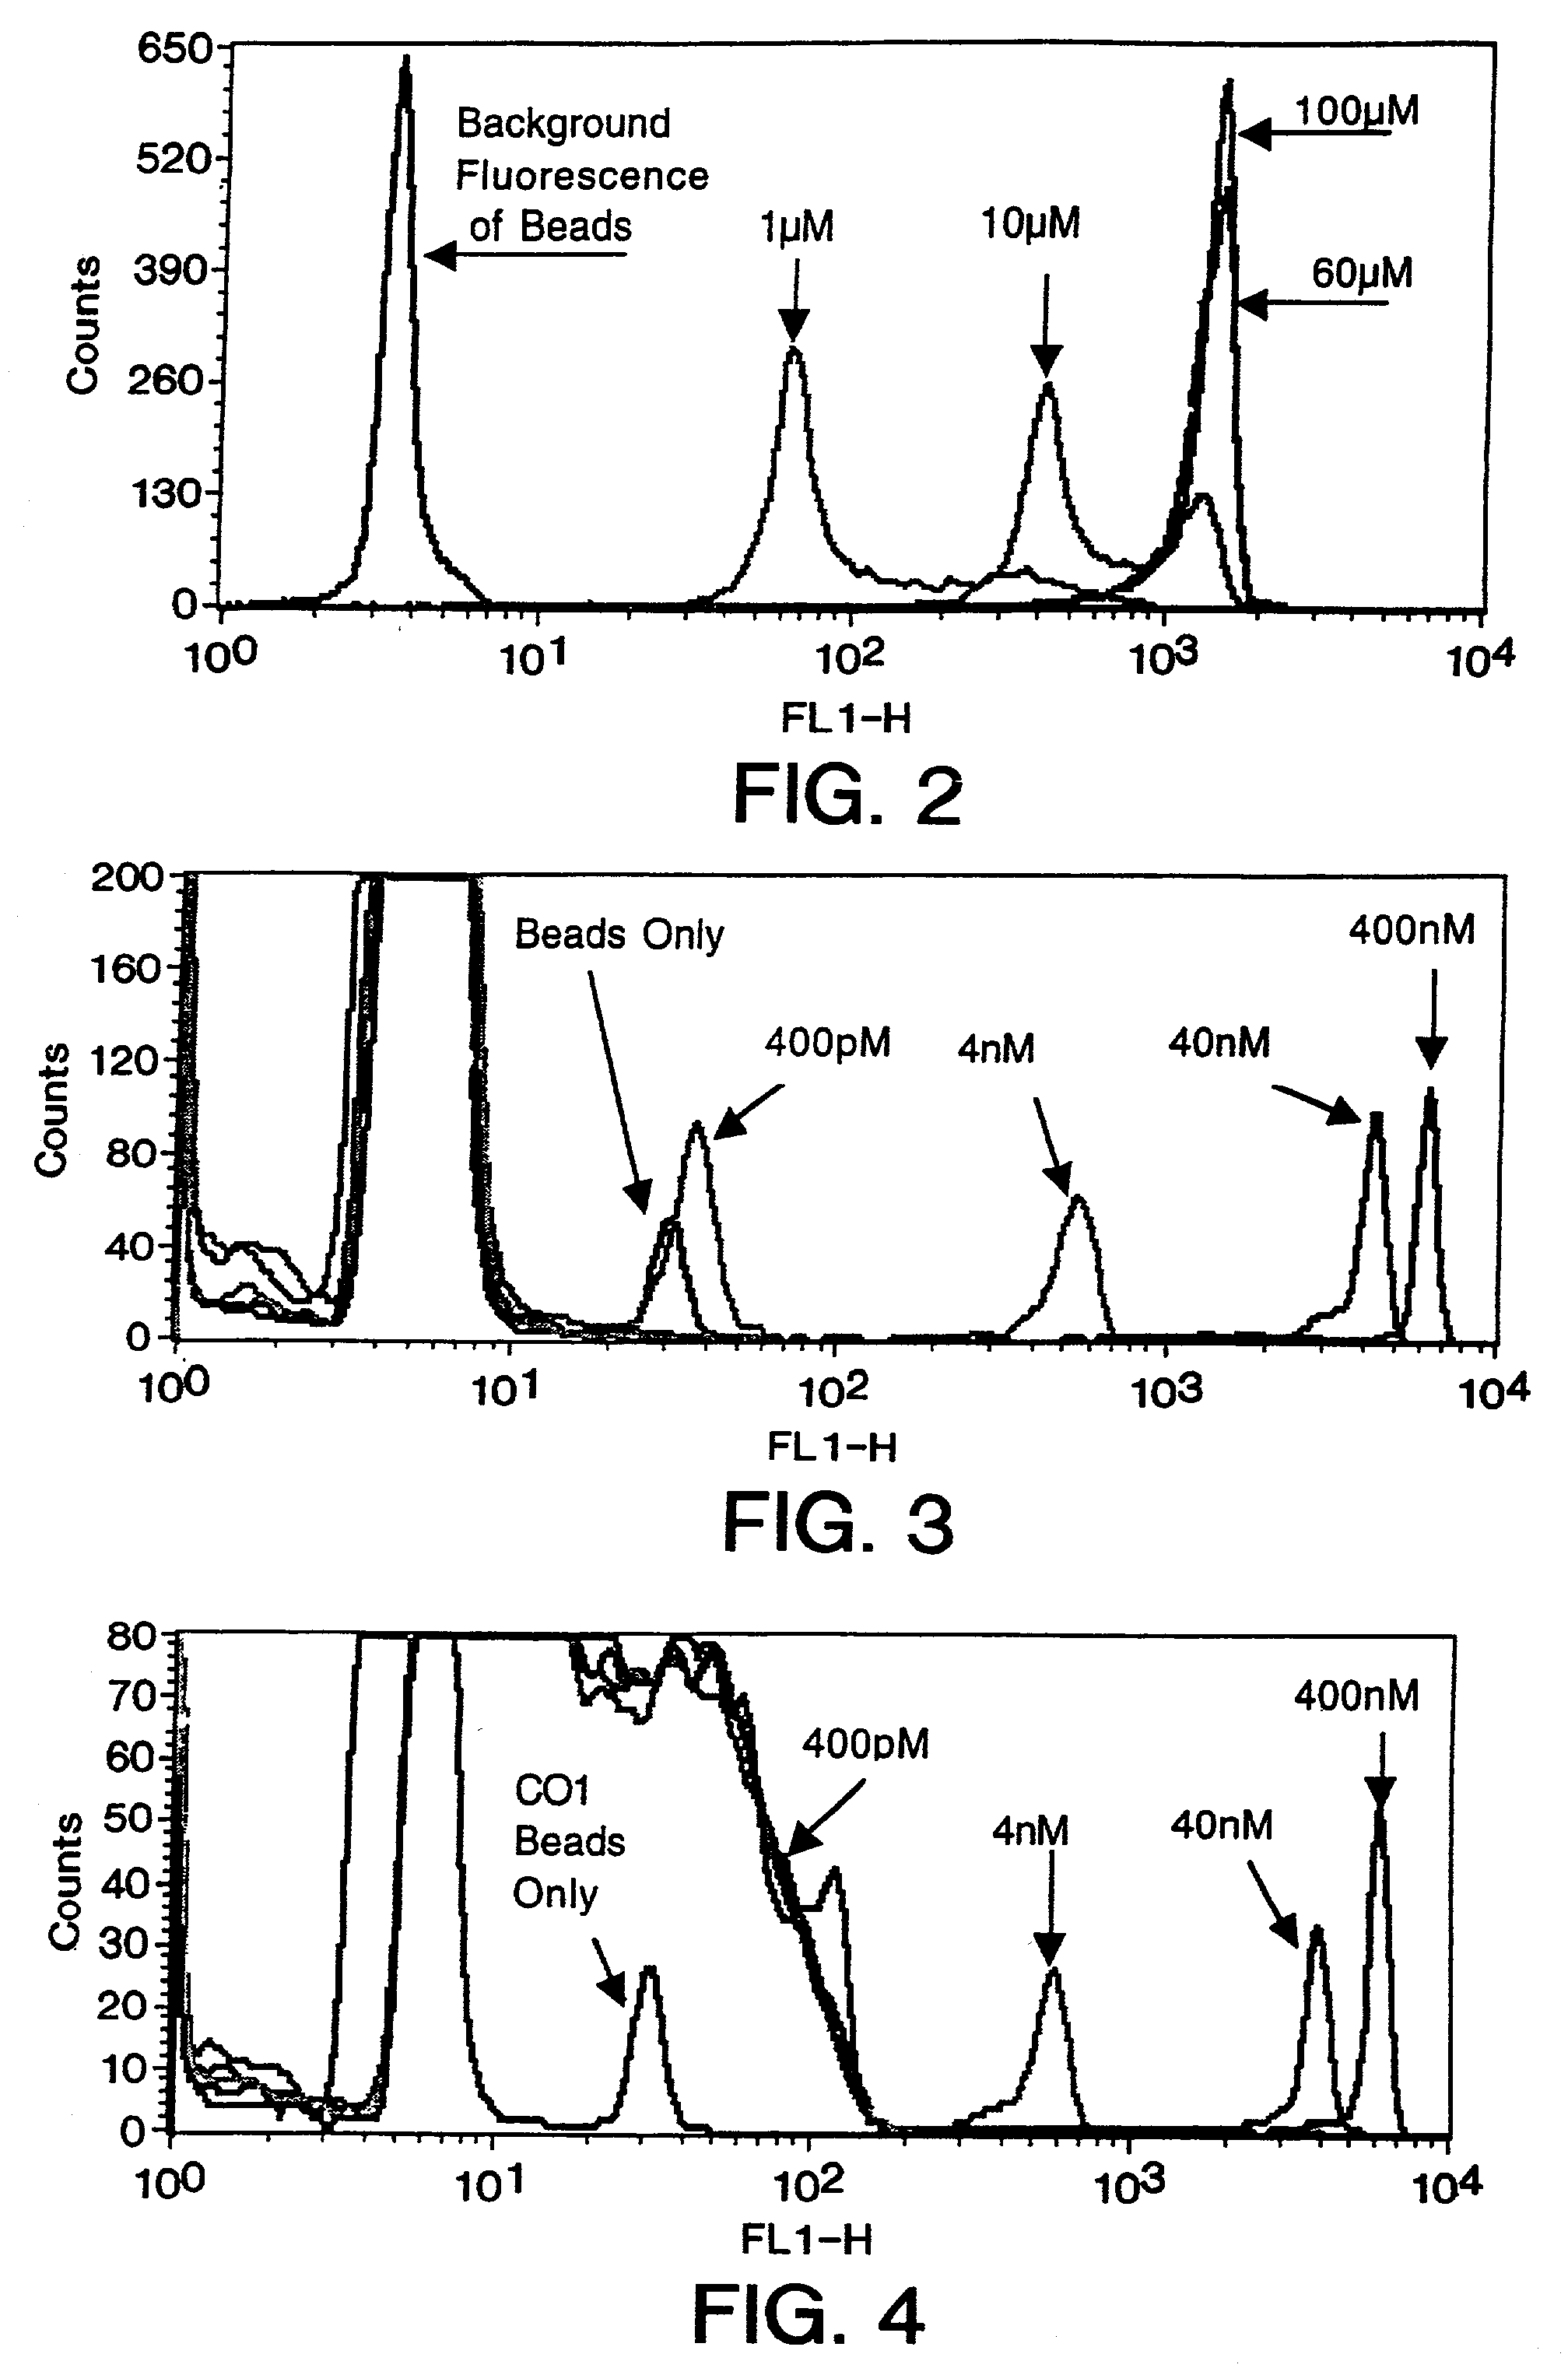 Methods for measuring relative amounts of nucleic acids in a complex mixture and retrieval of specific sequences therefrom